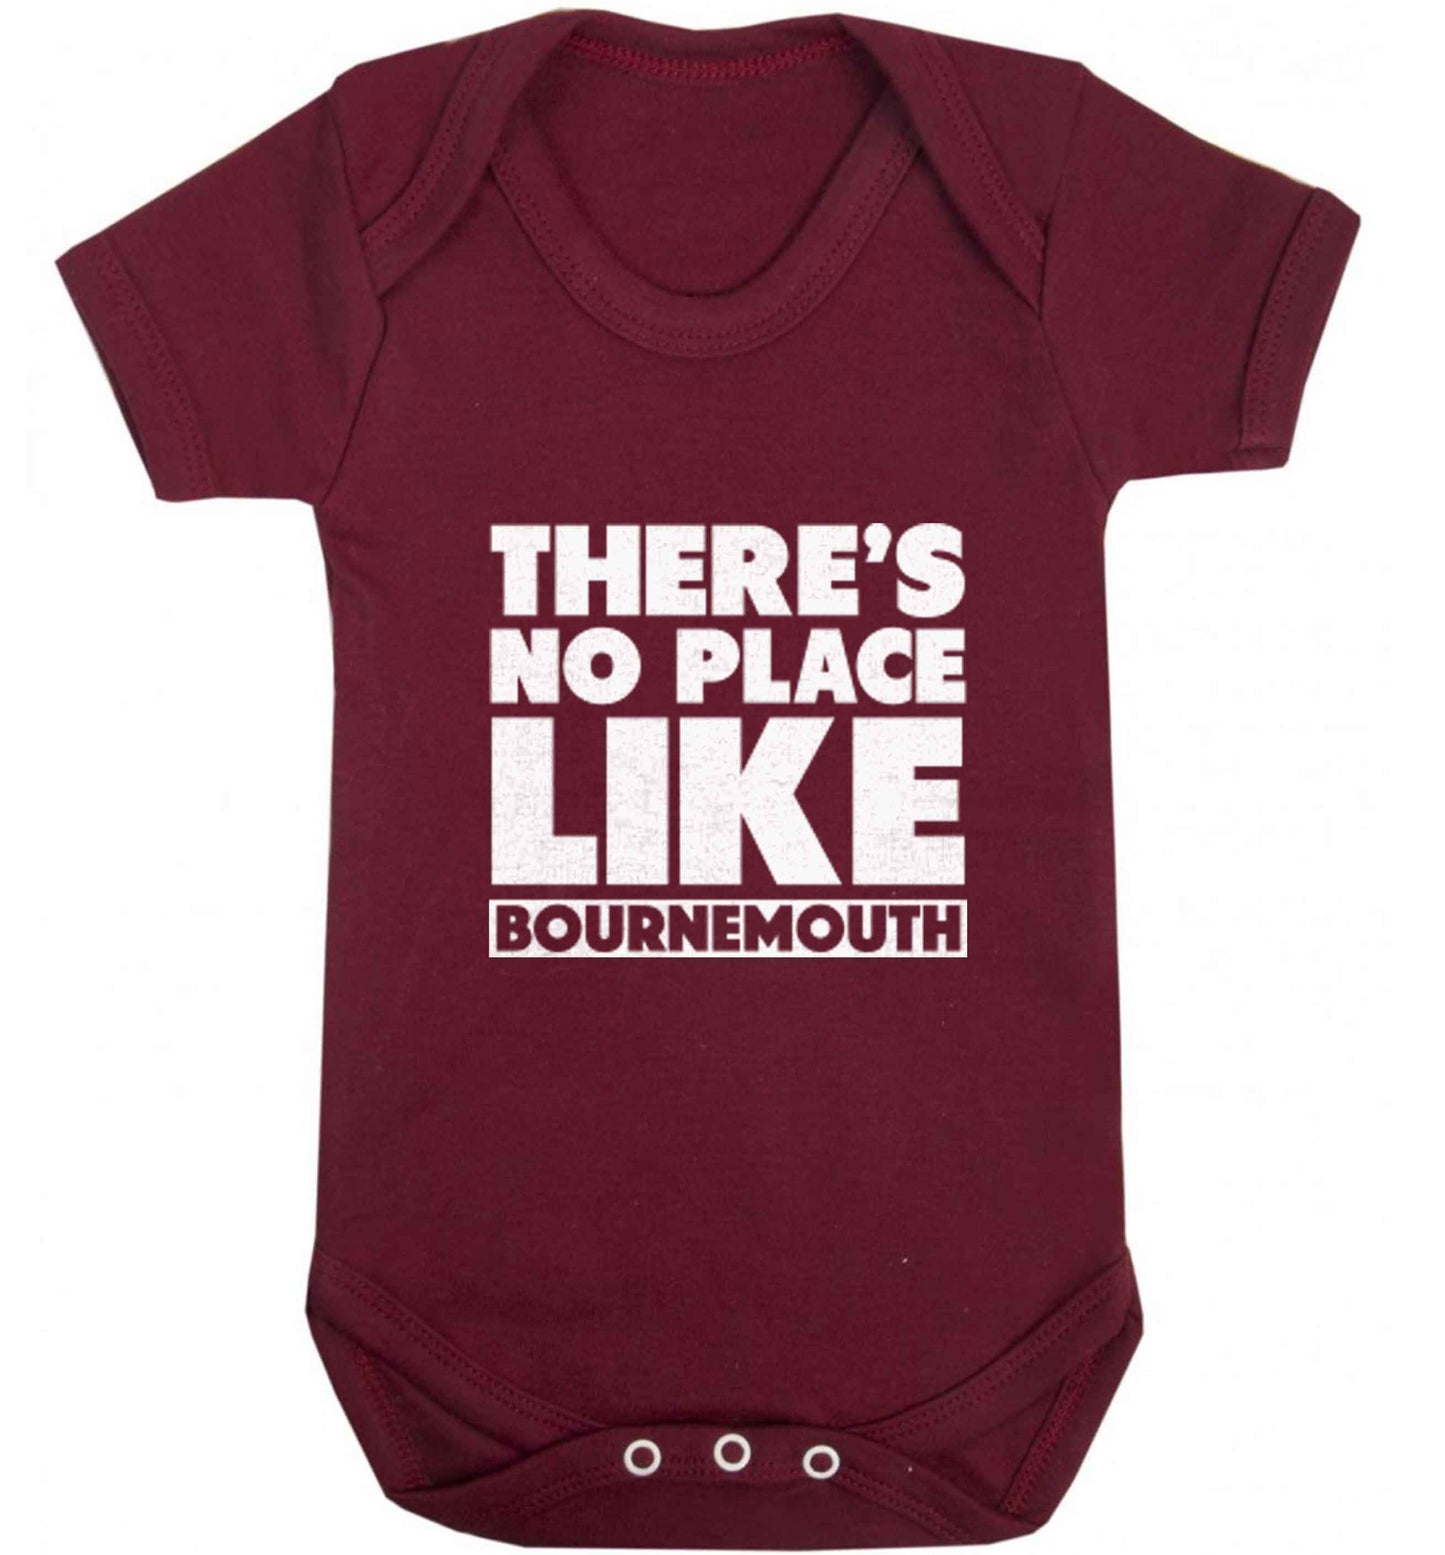 There's no place like Bournemouth baby vest maroon 18-24 months